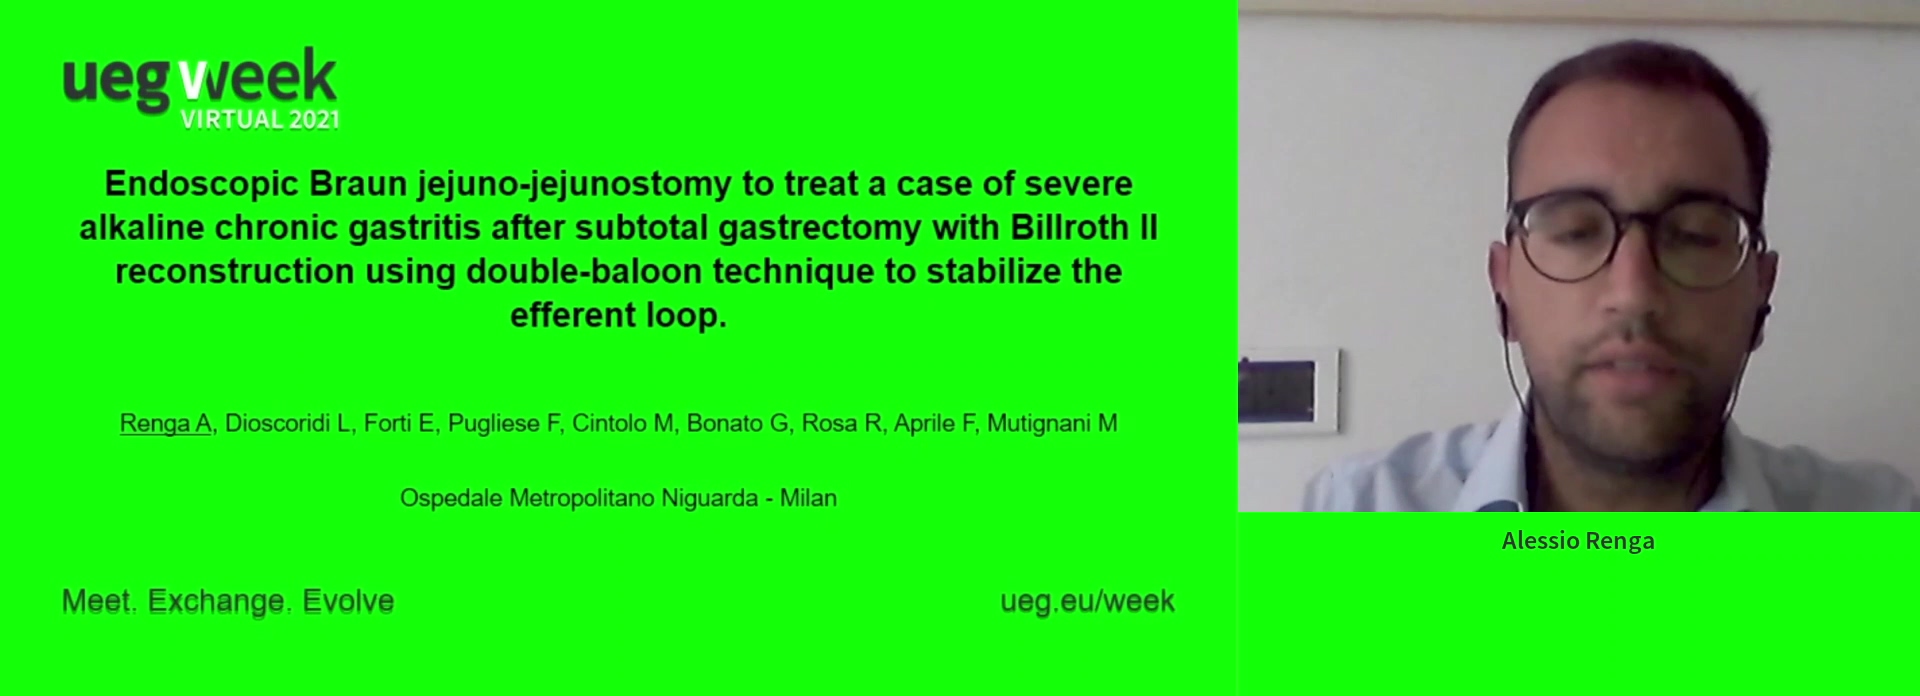 ENDOSCOPIC BRAUN JEJUNO-JEJUNOSTOMY TO TREAT A CASE OF SEVERE ALKALINE CHRONIC GASTRITIS AFTER SUBTOTAL GASTRECTOMY WITH BILLROTH II RECONSTRUCTION USING DOUBLE-BALLOON TECHNIQUE TO STABILIZE THE EFFERENT LOOP